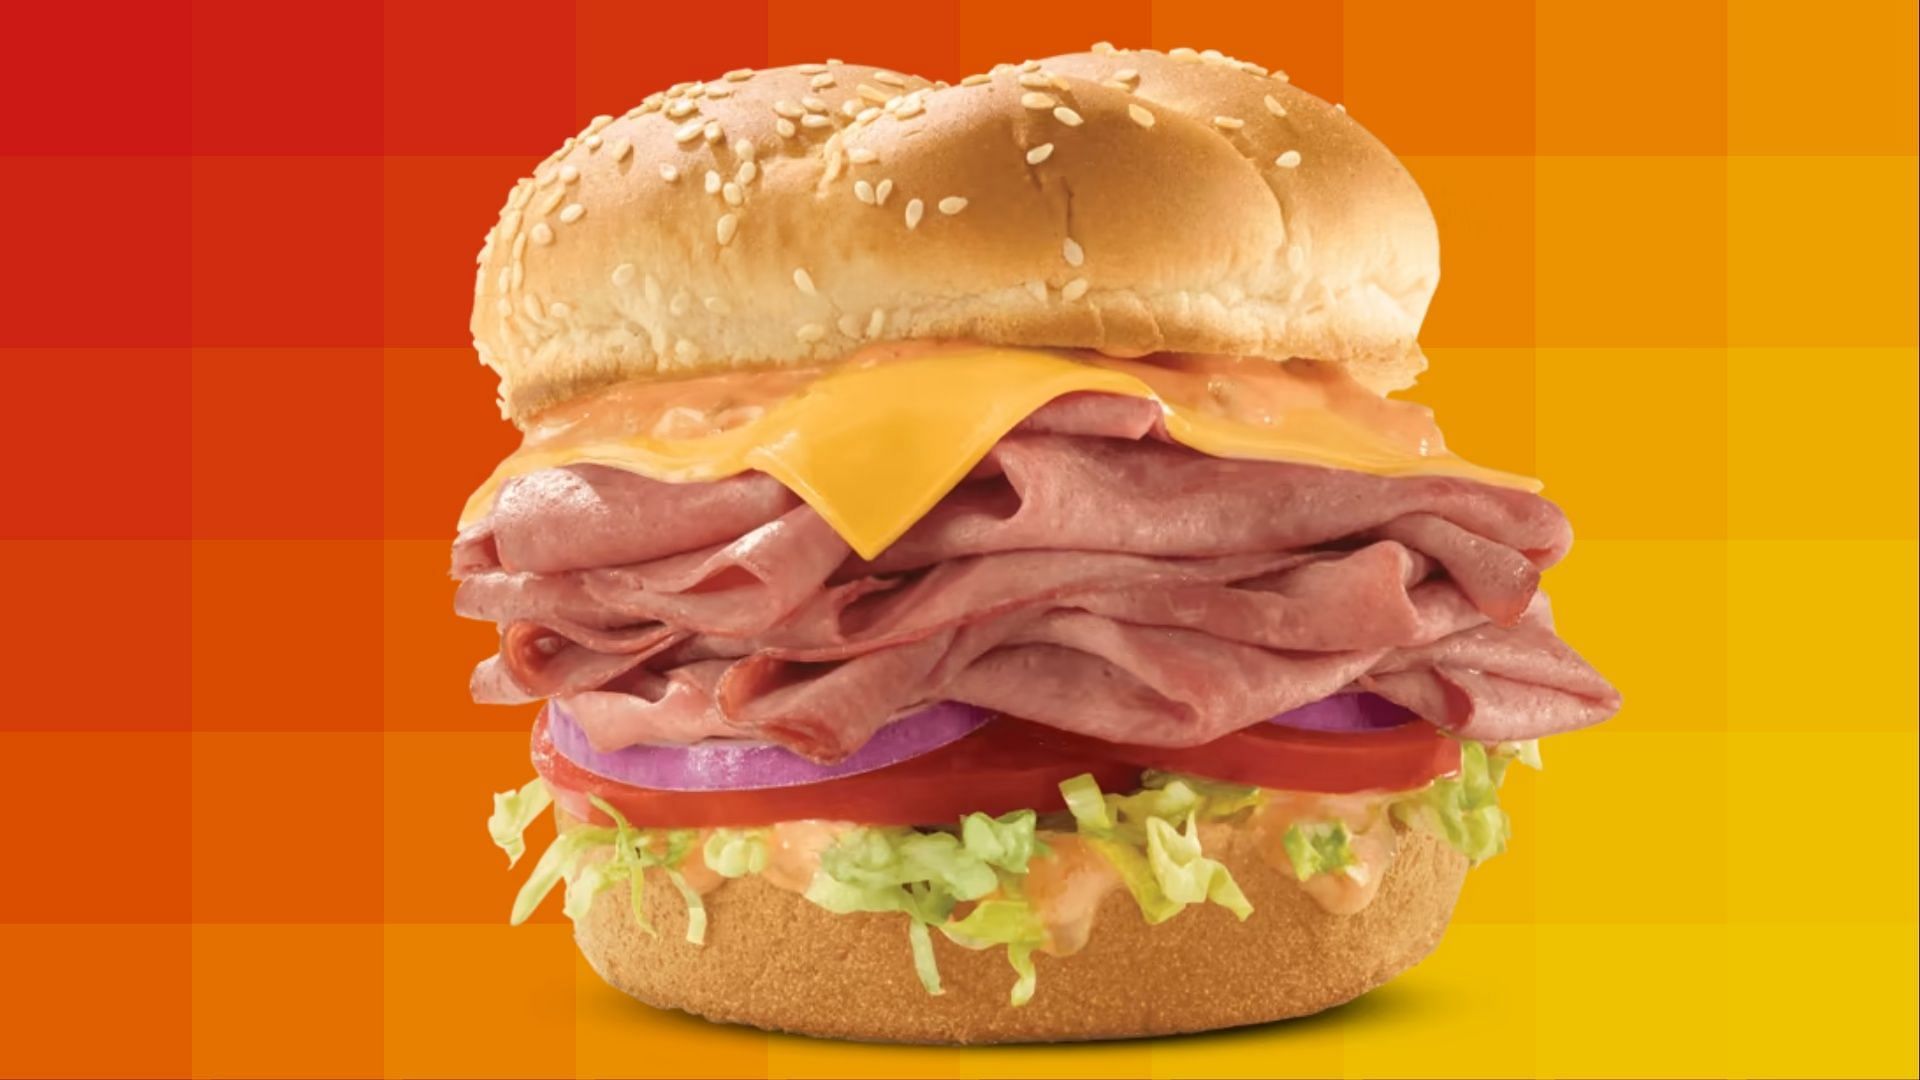 The new Americana Roast Beef Sandwich is available at locations across the country starting May 22 (Image via Arby&rsquo;s)